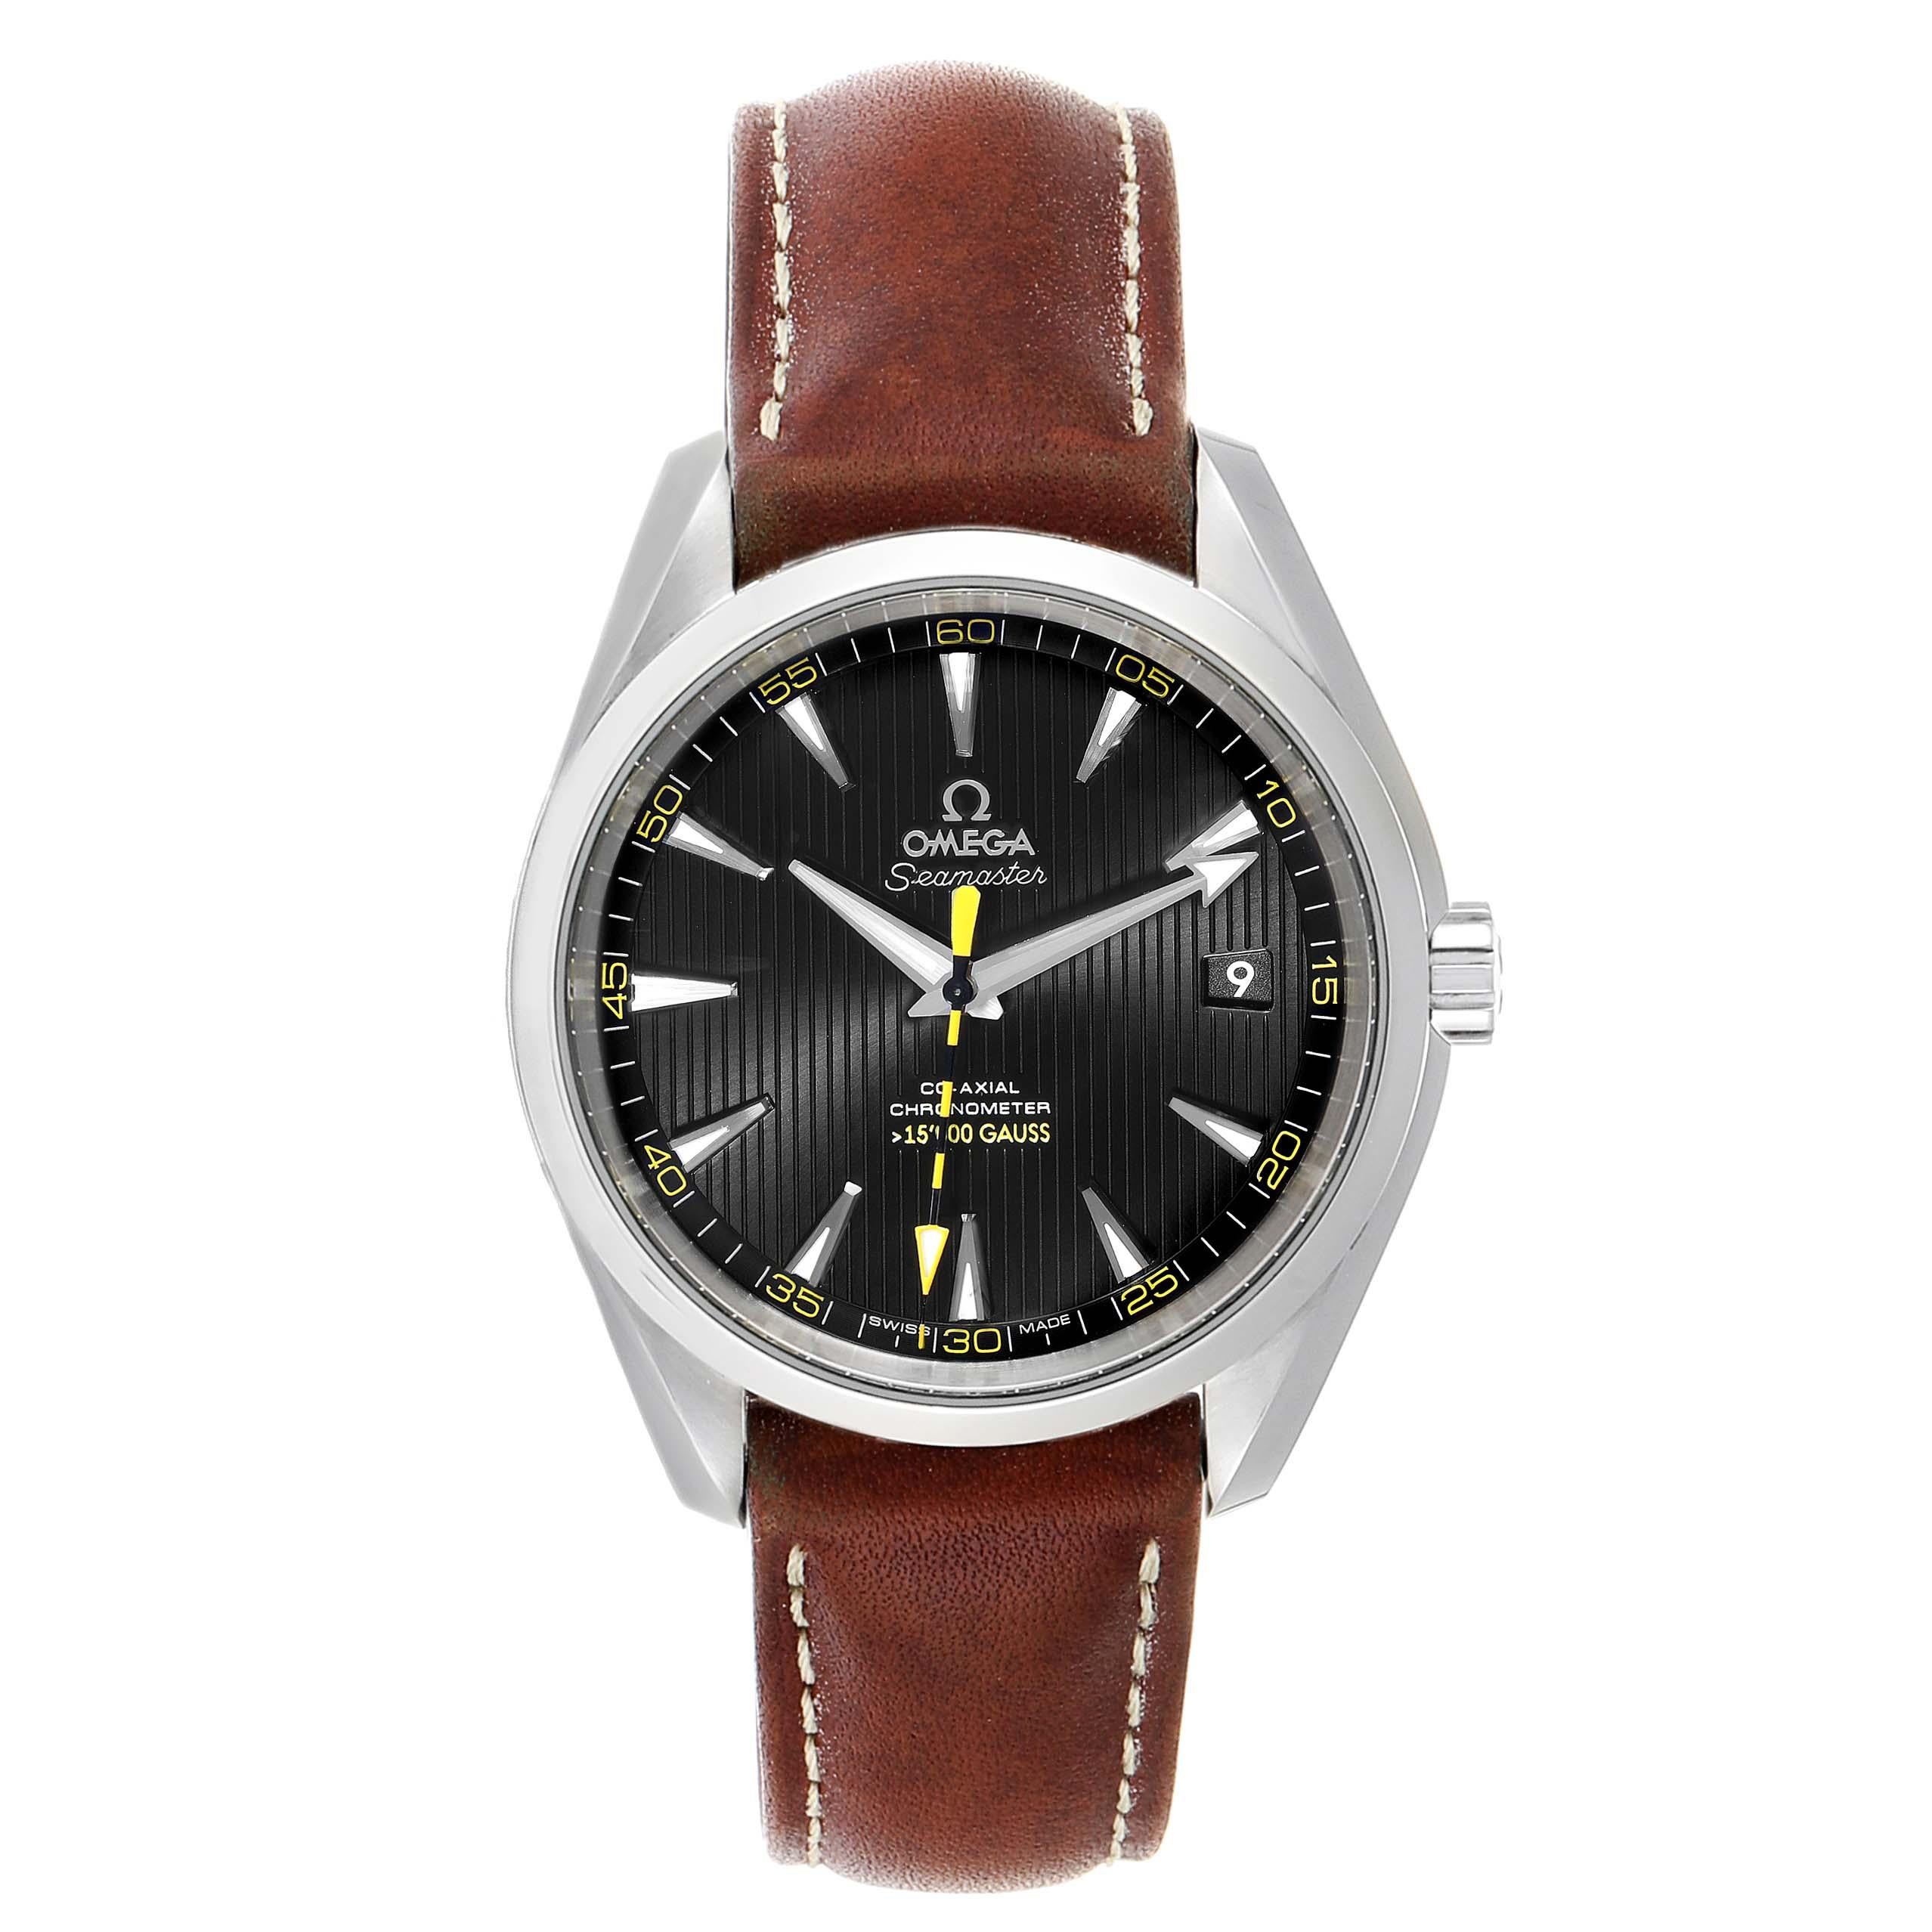 Omega Aqua Terra Co-Axial 5000 Gauss Yellow Hand Watch 231.12.42.21.01.001. Anti-magnetic, Automatic self-winding Co-Axial movement. Free sprung-balance, 2 barrels mounted in series, automatic winding in both directions. Blackened screws, barrels